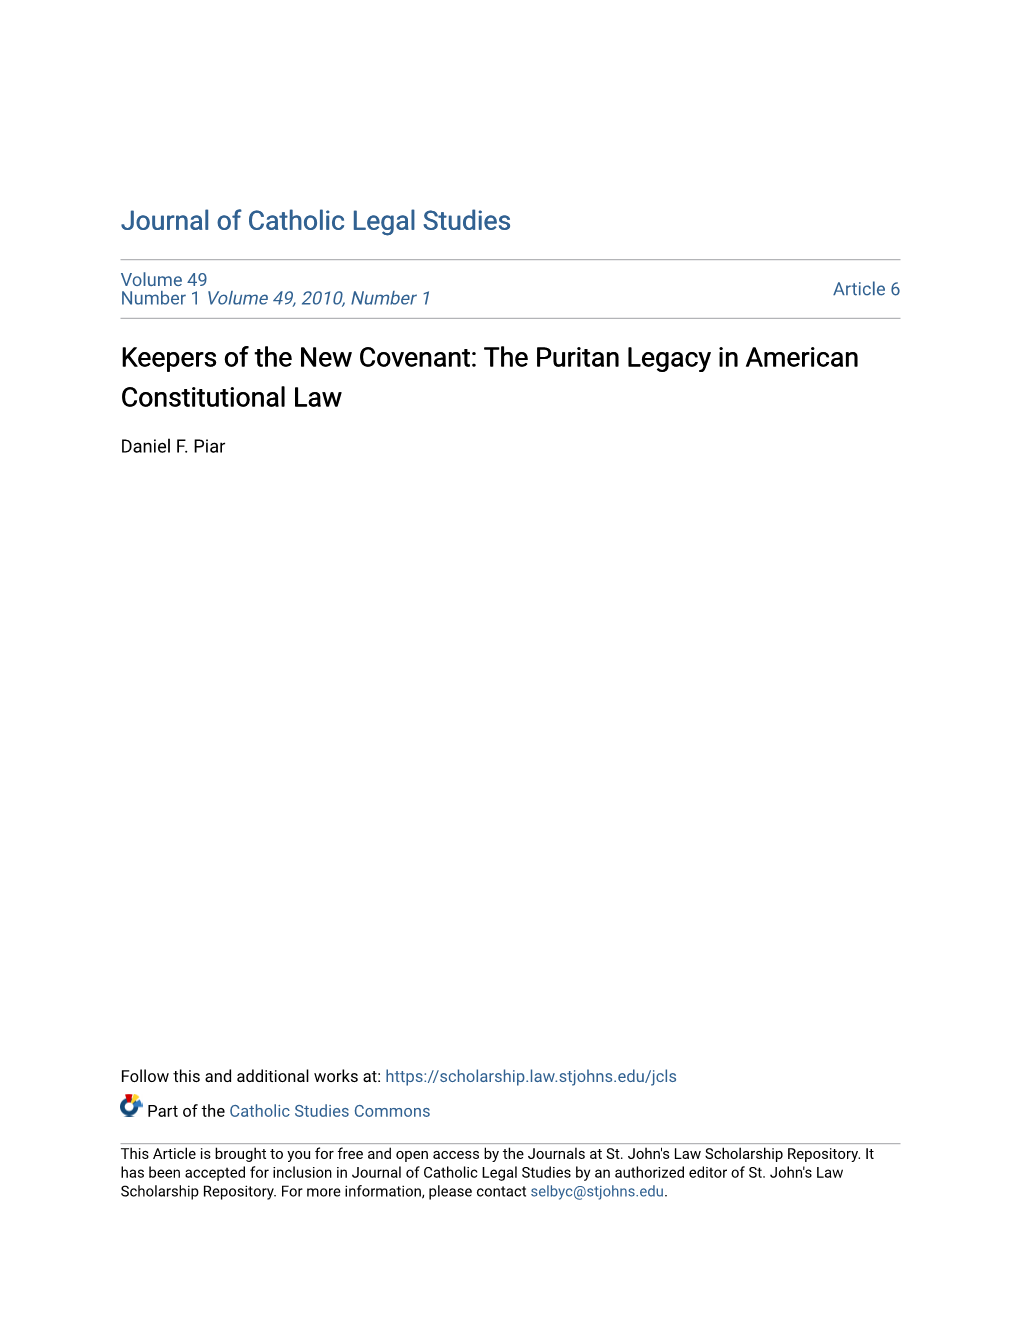 Keepers of the New Covenant: the Puritan Legacy in American Constitutional Law